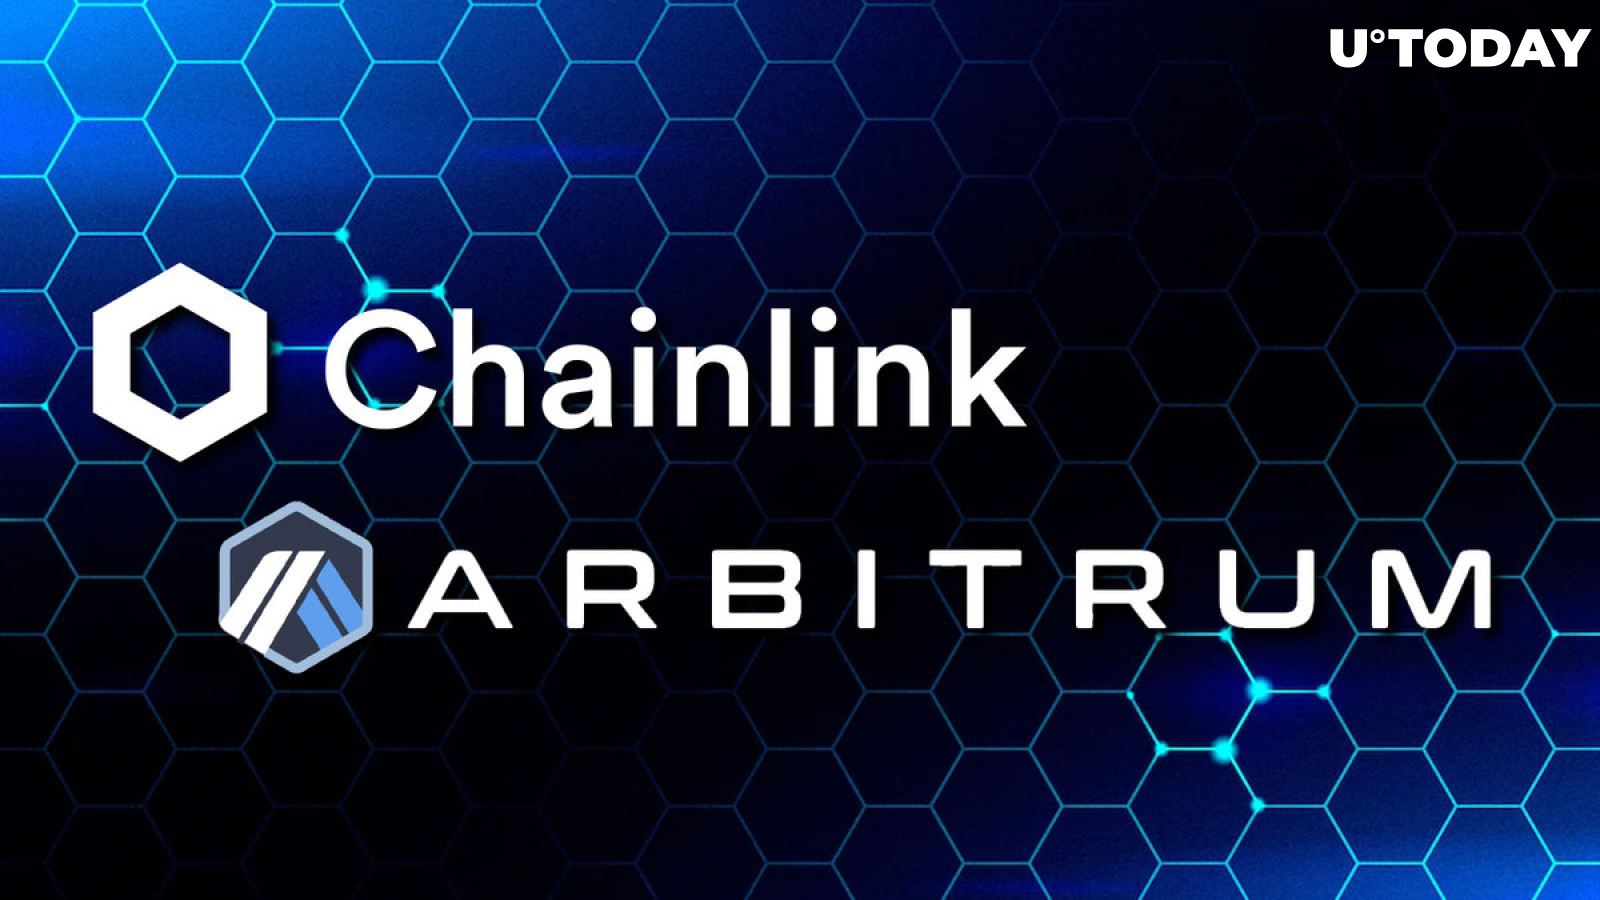 Chainlink and Arbitrum: Partnership That Could Impact Crypto Market